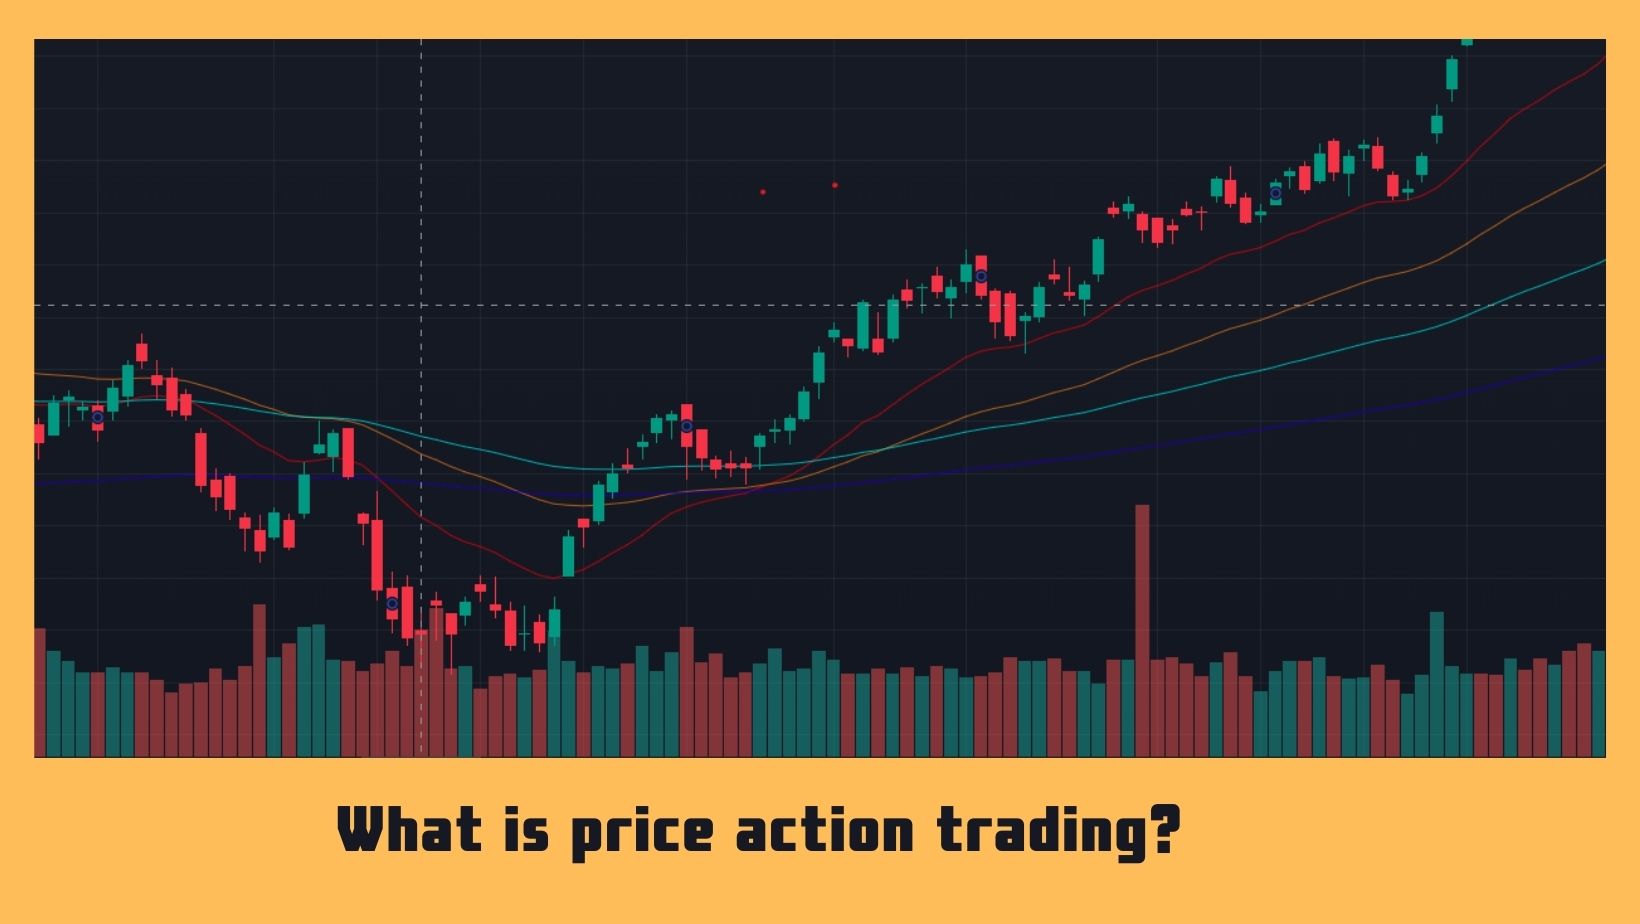 What is price action trading?